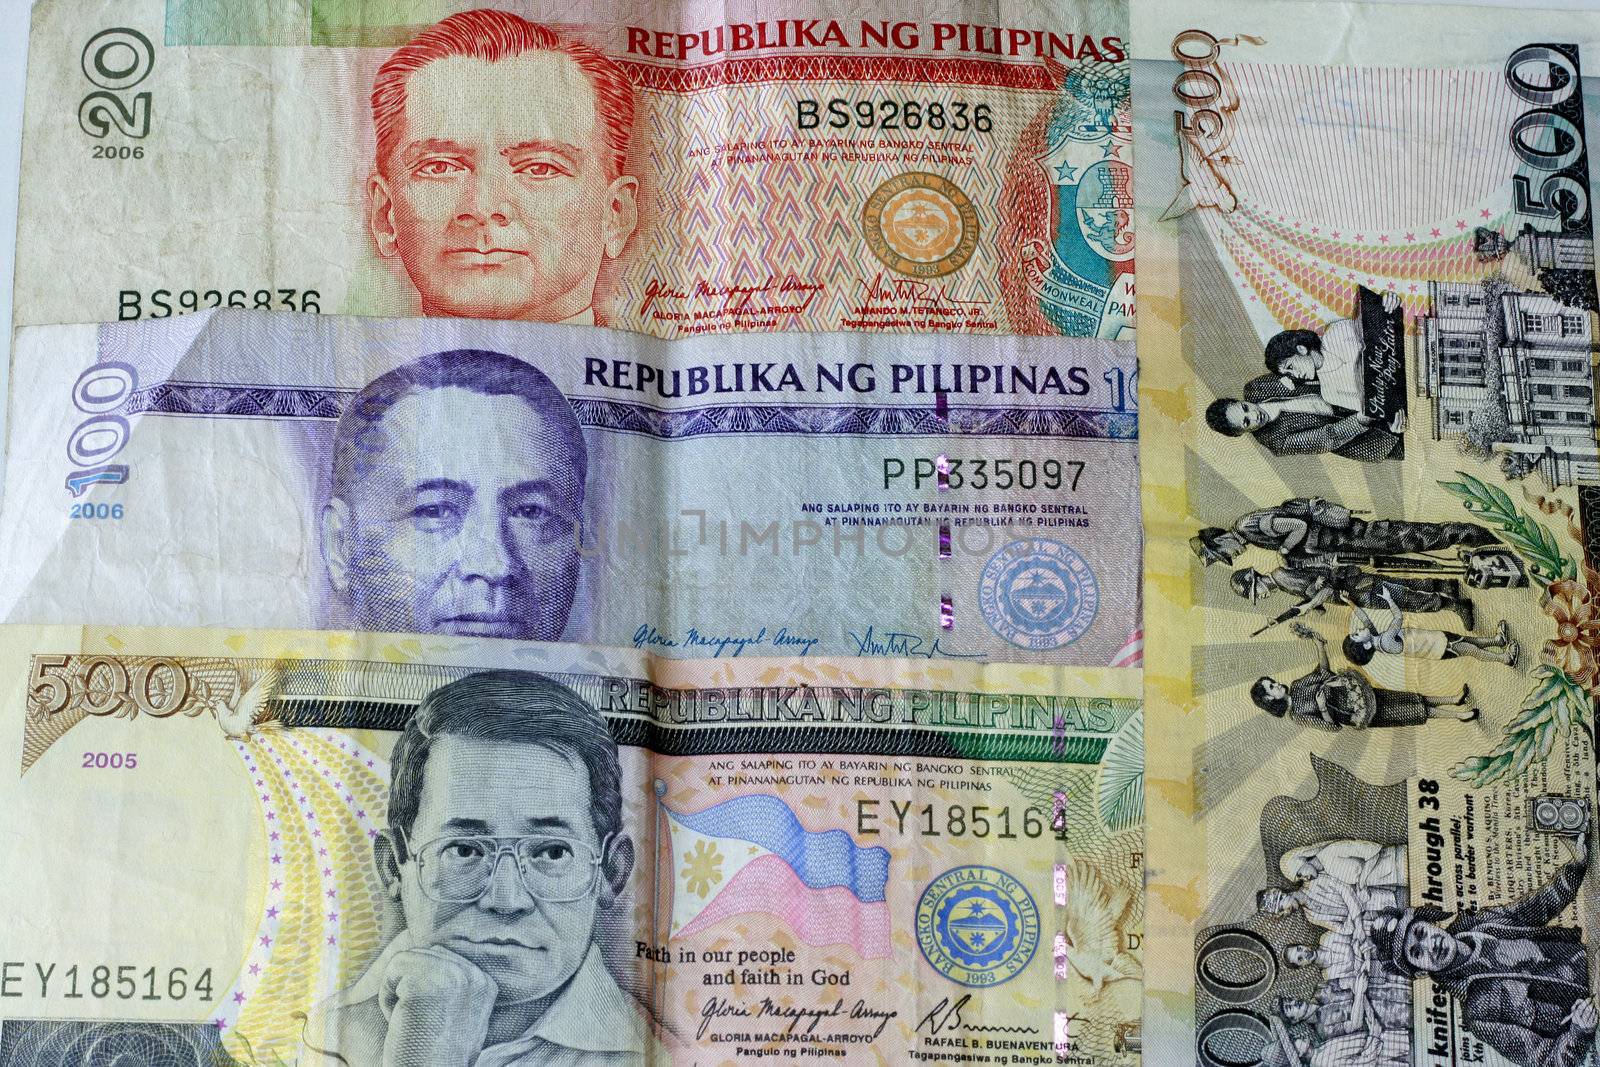 Philippine Peso 500 100 20 currency detail